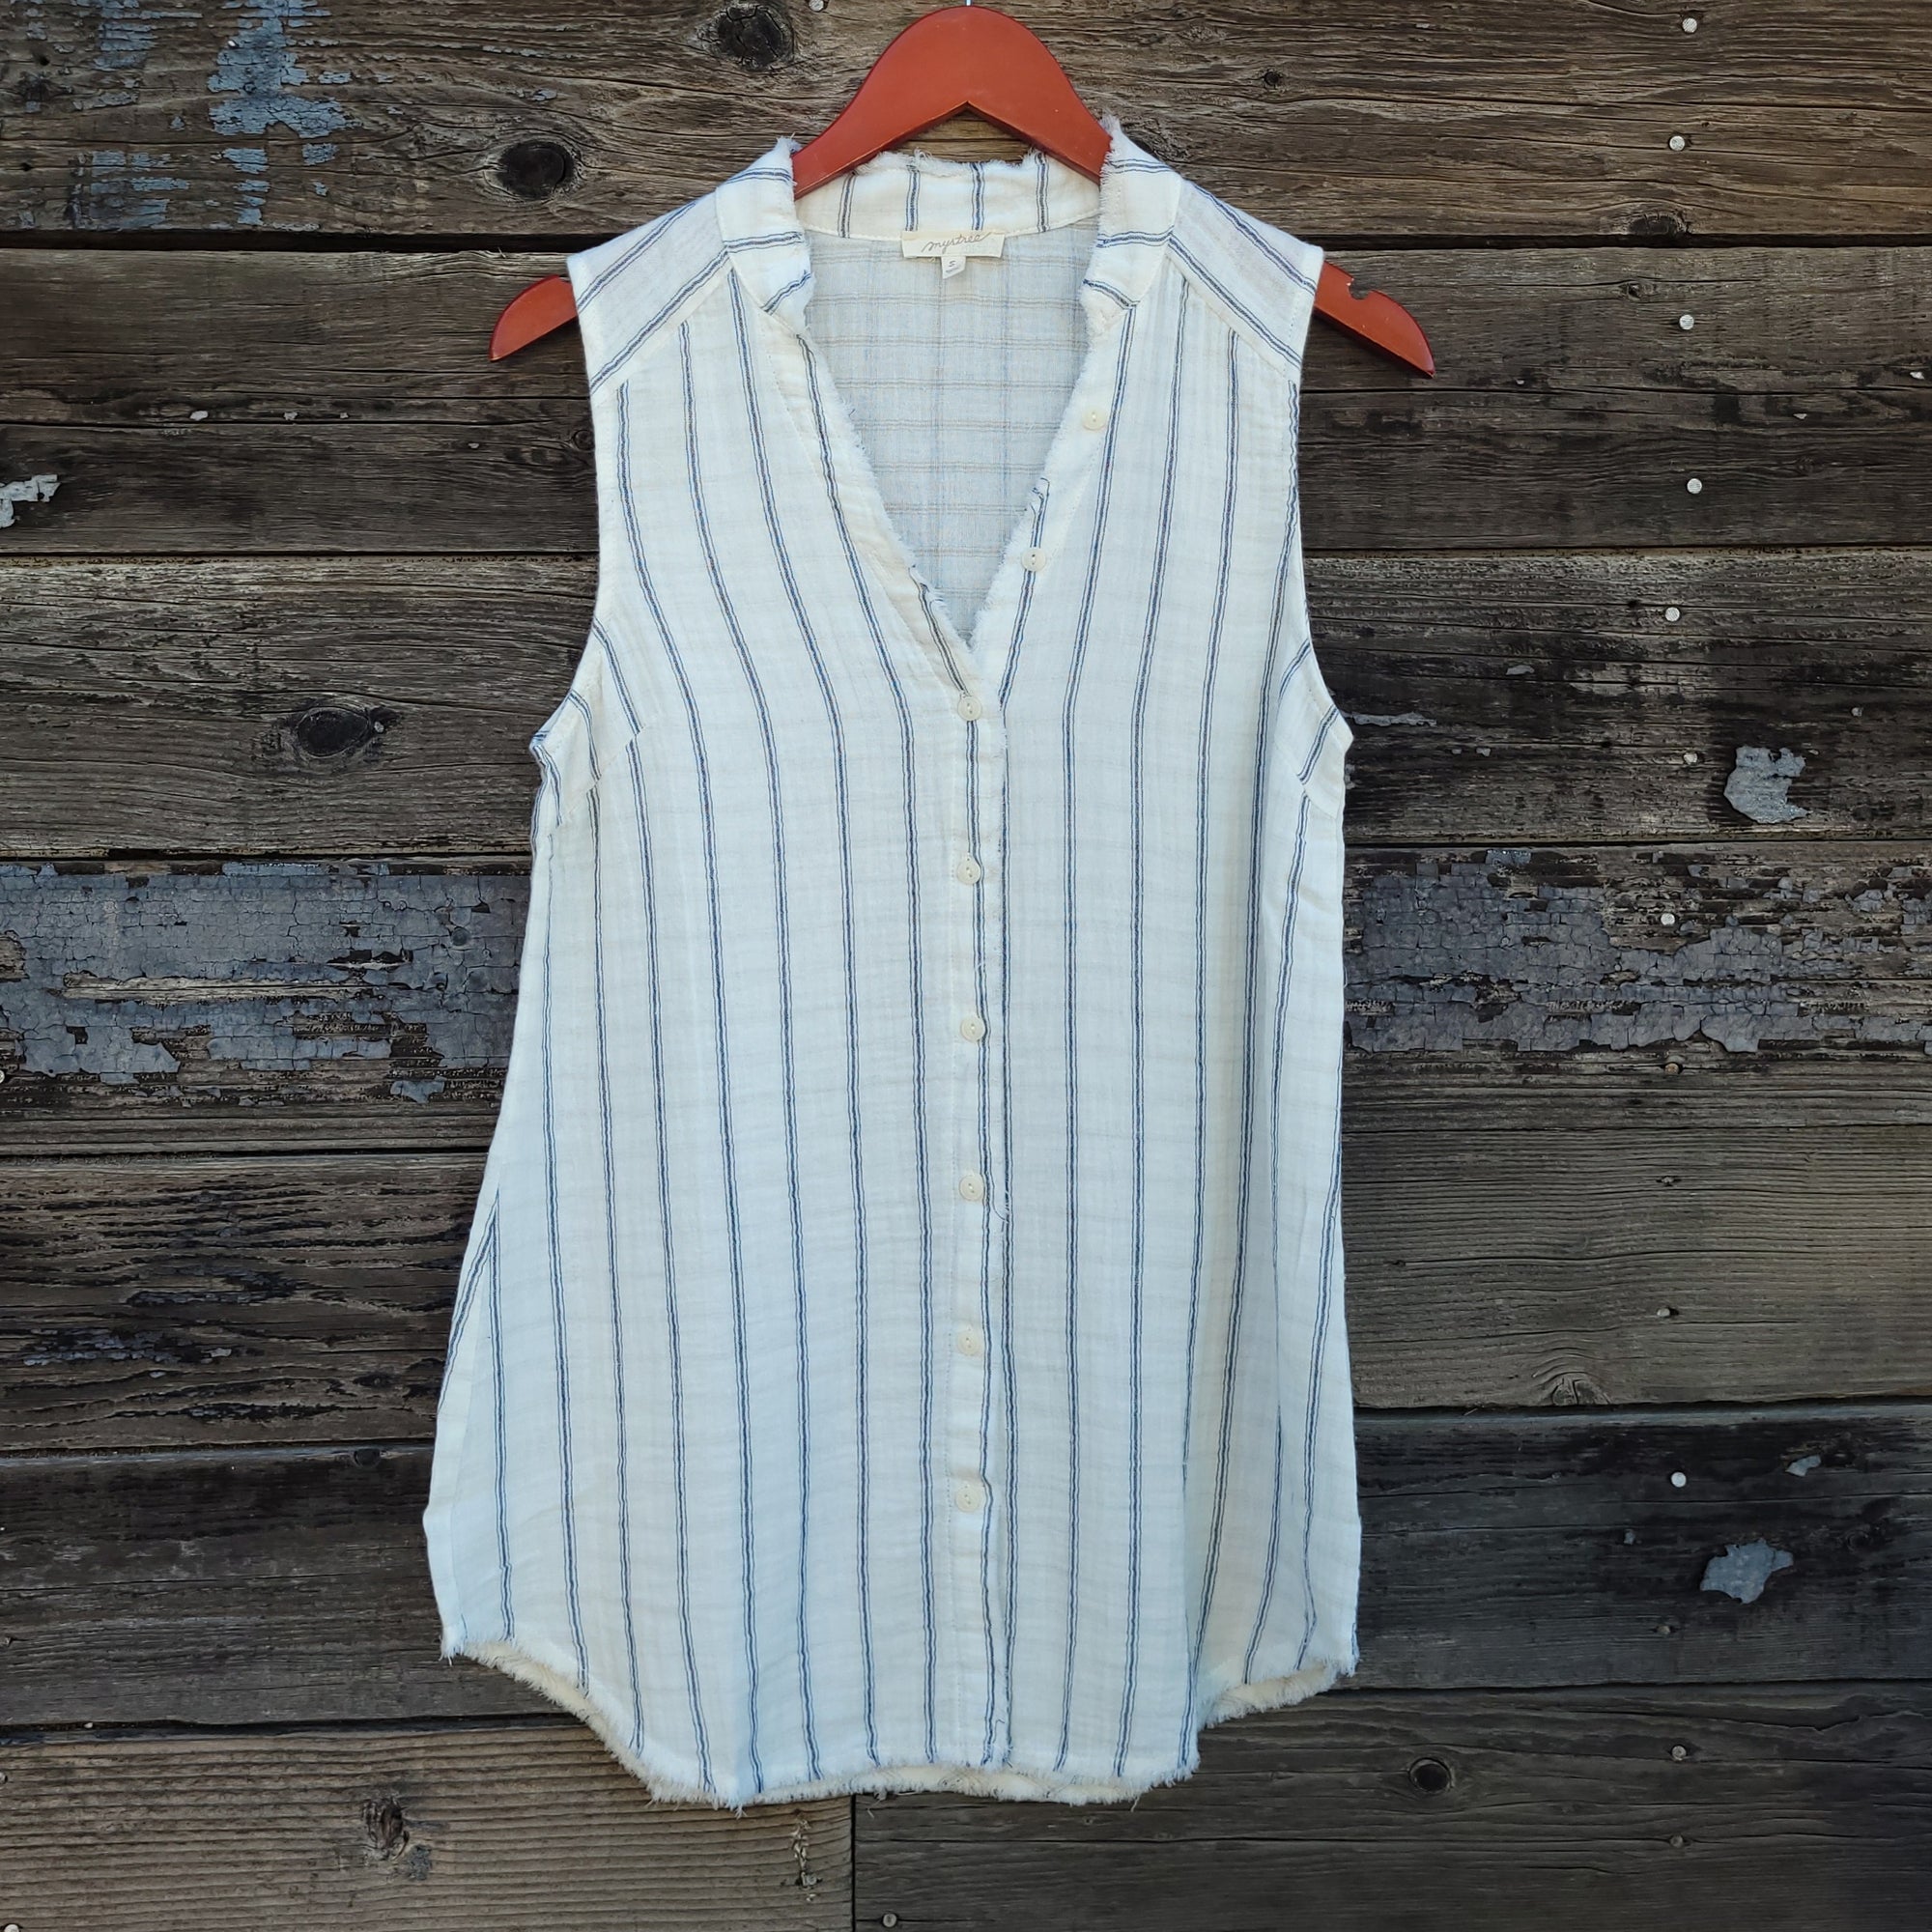 Mystree - Striped Sleeveless Button-up Tunic with Frayed Edges